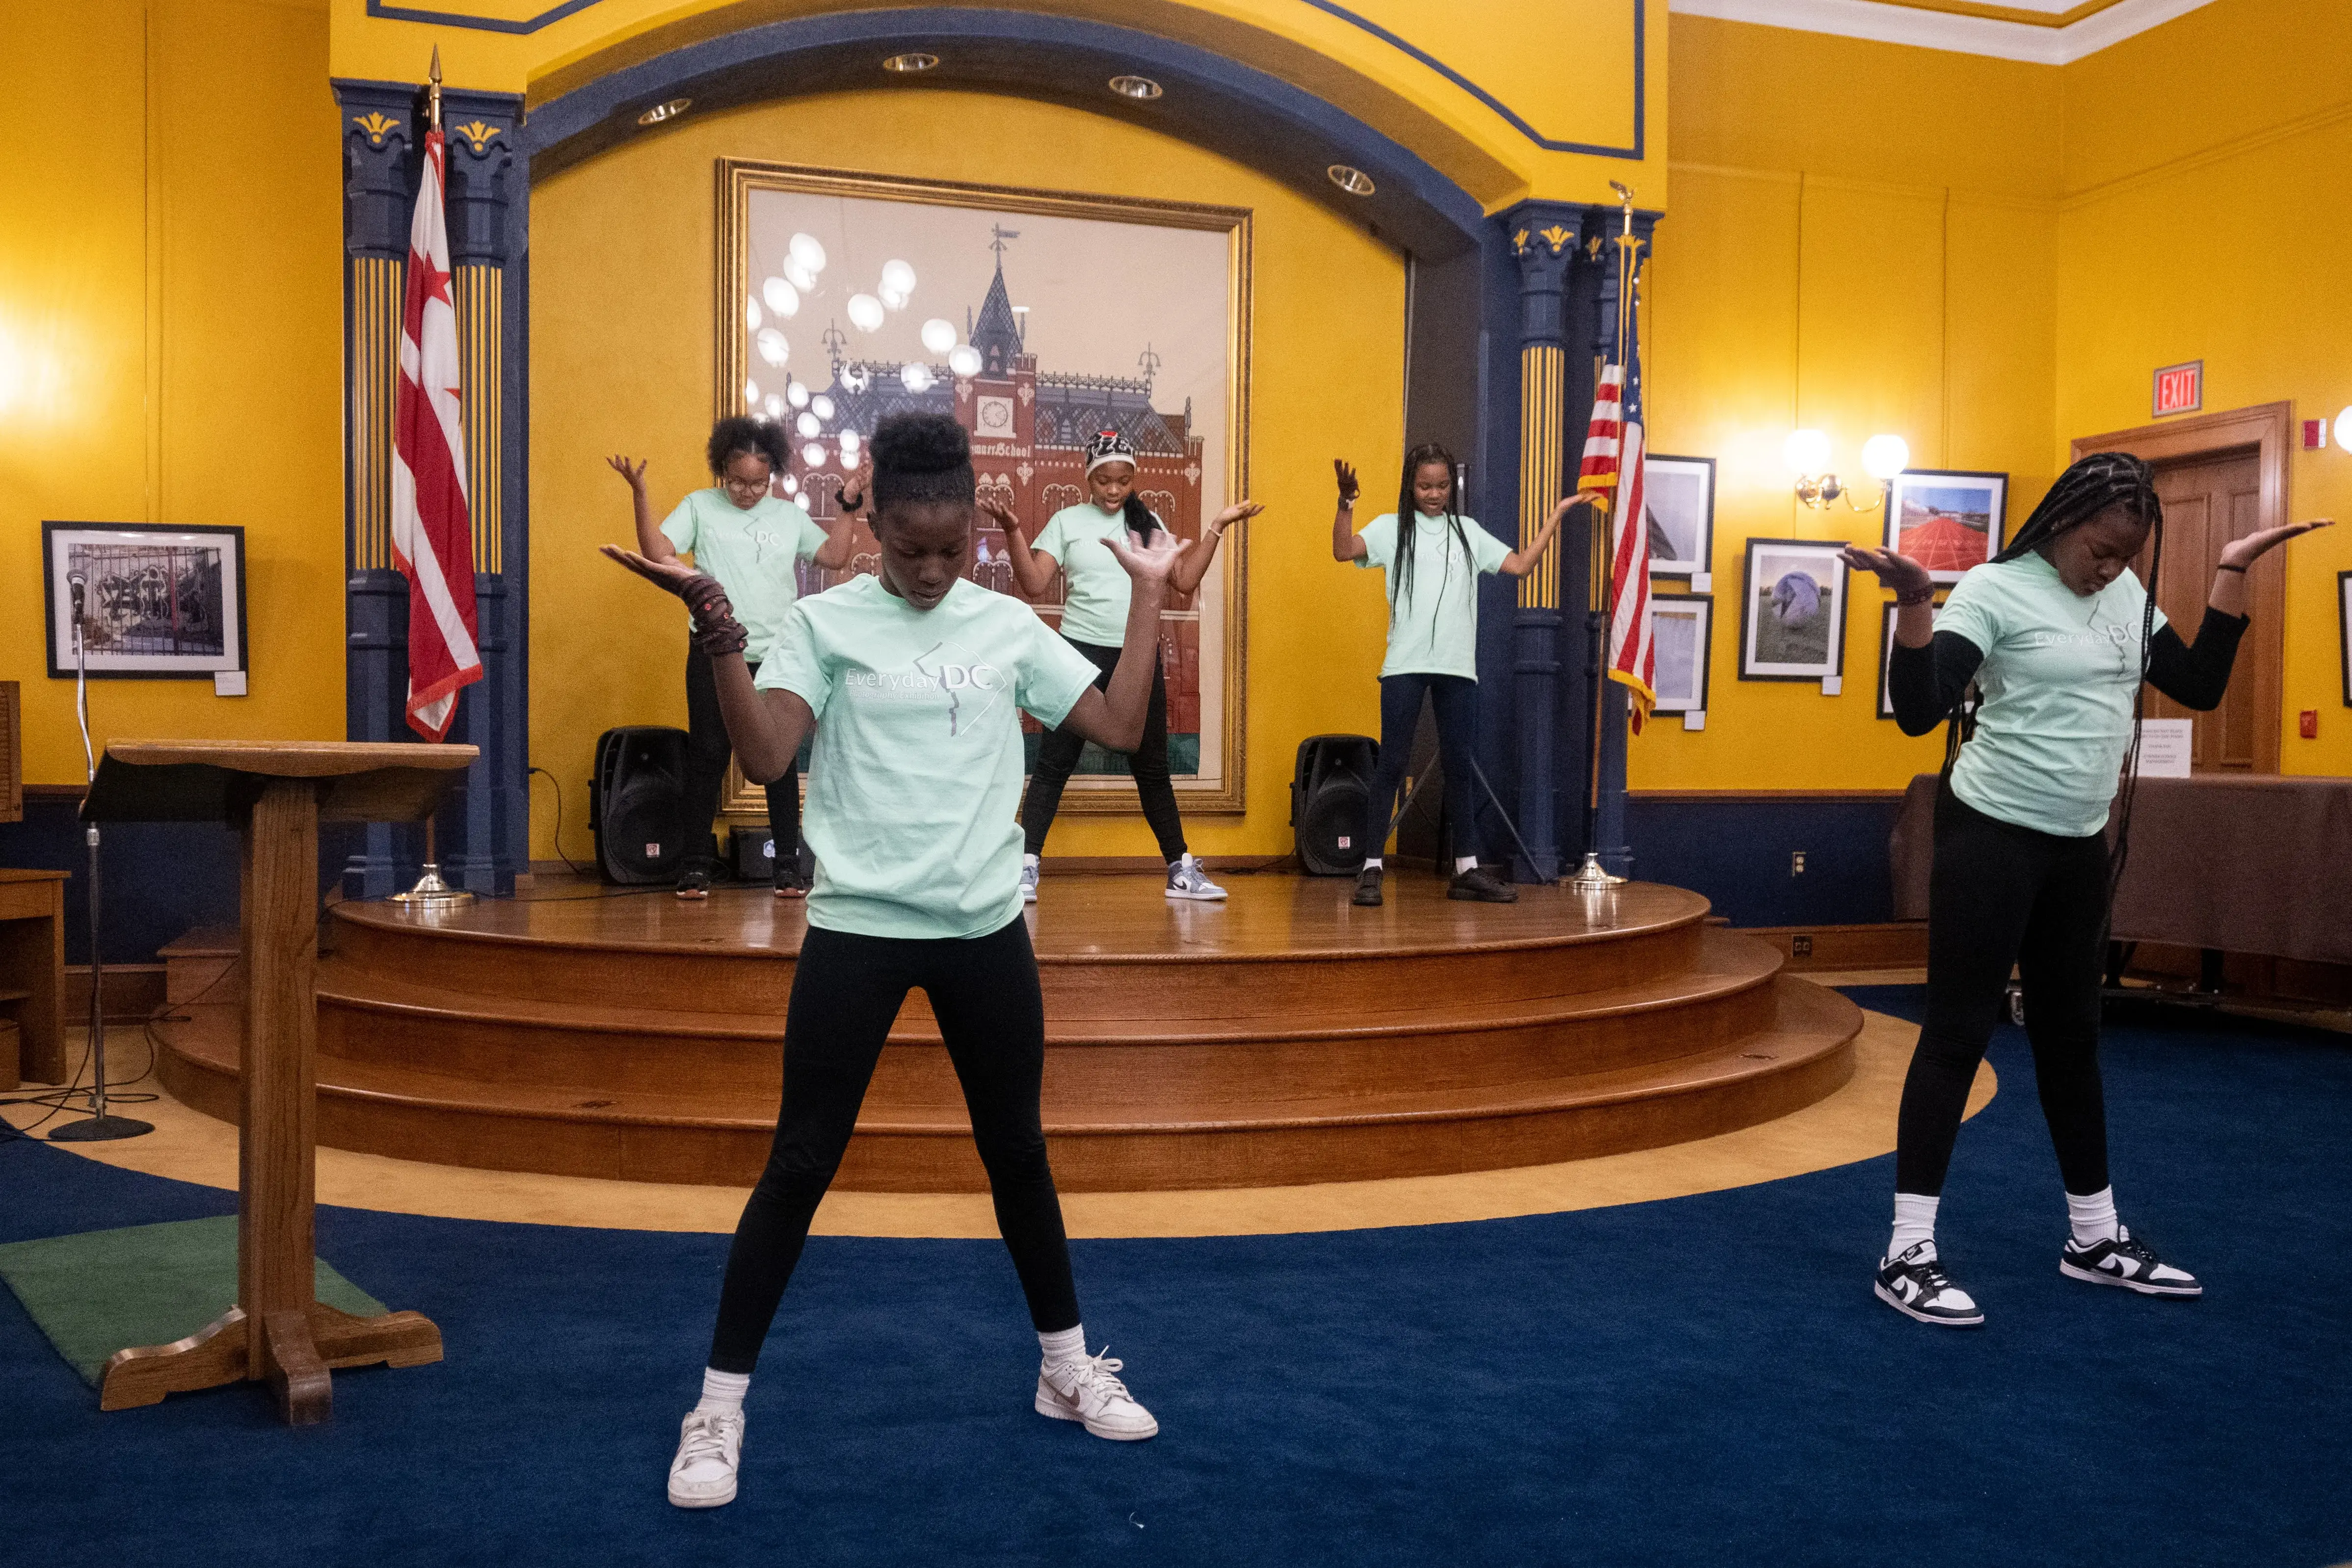 Six middle school students wearing green Everyday DC shirts pose during a dance in front of the audience for the Everyday DC opening reception